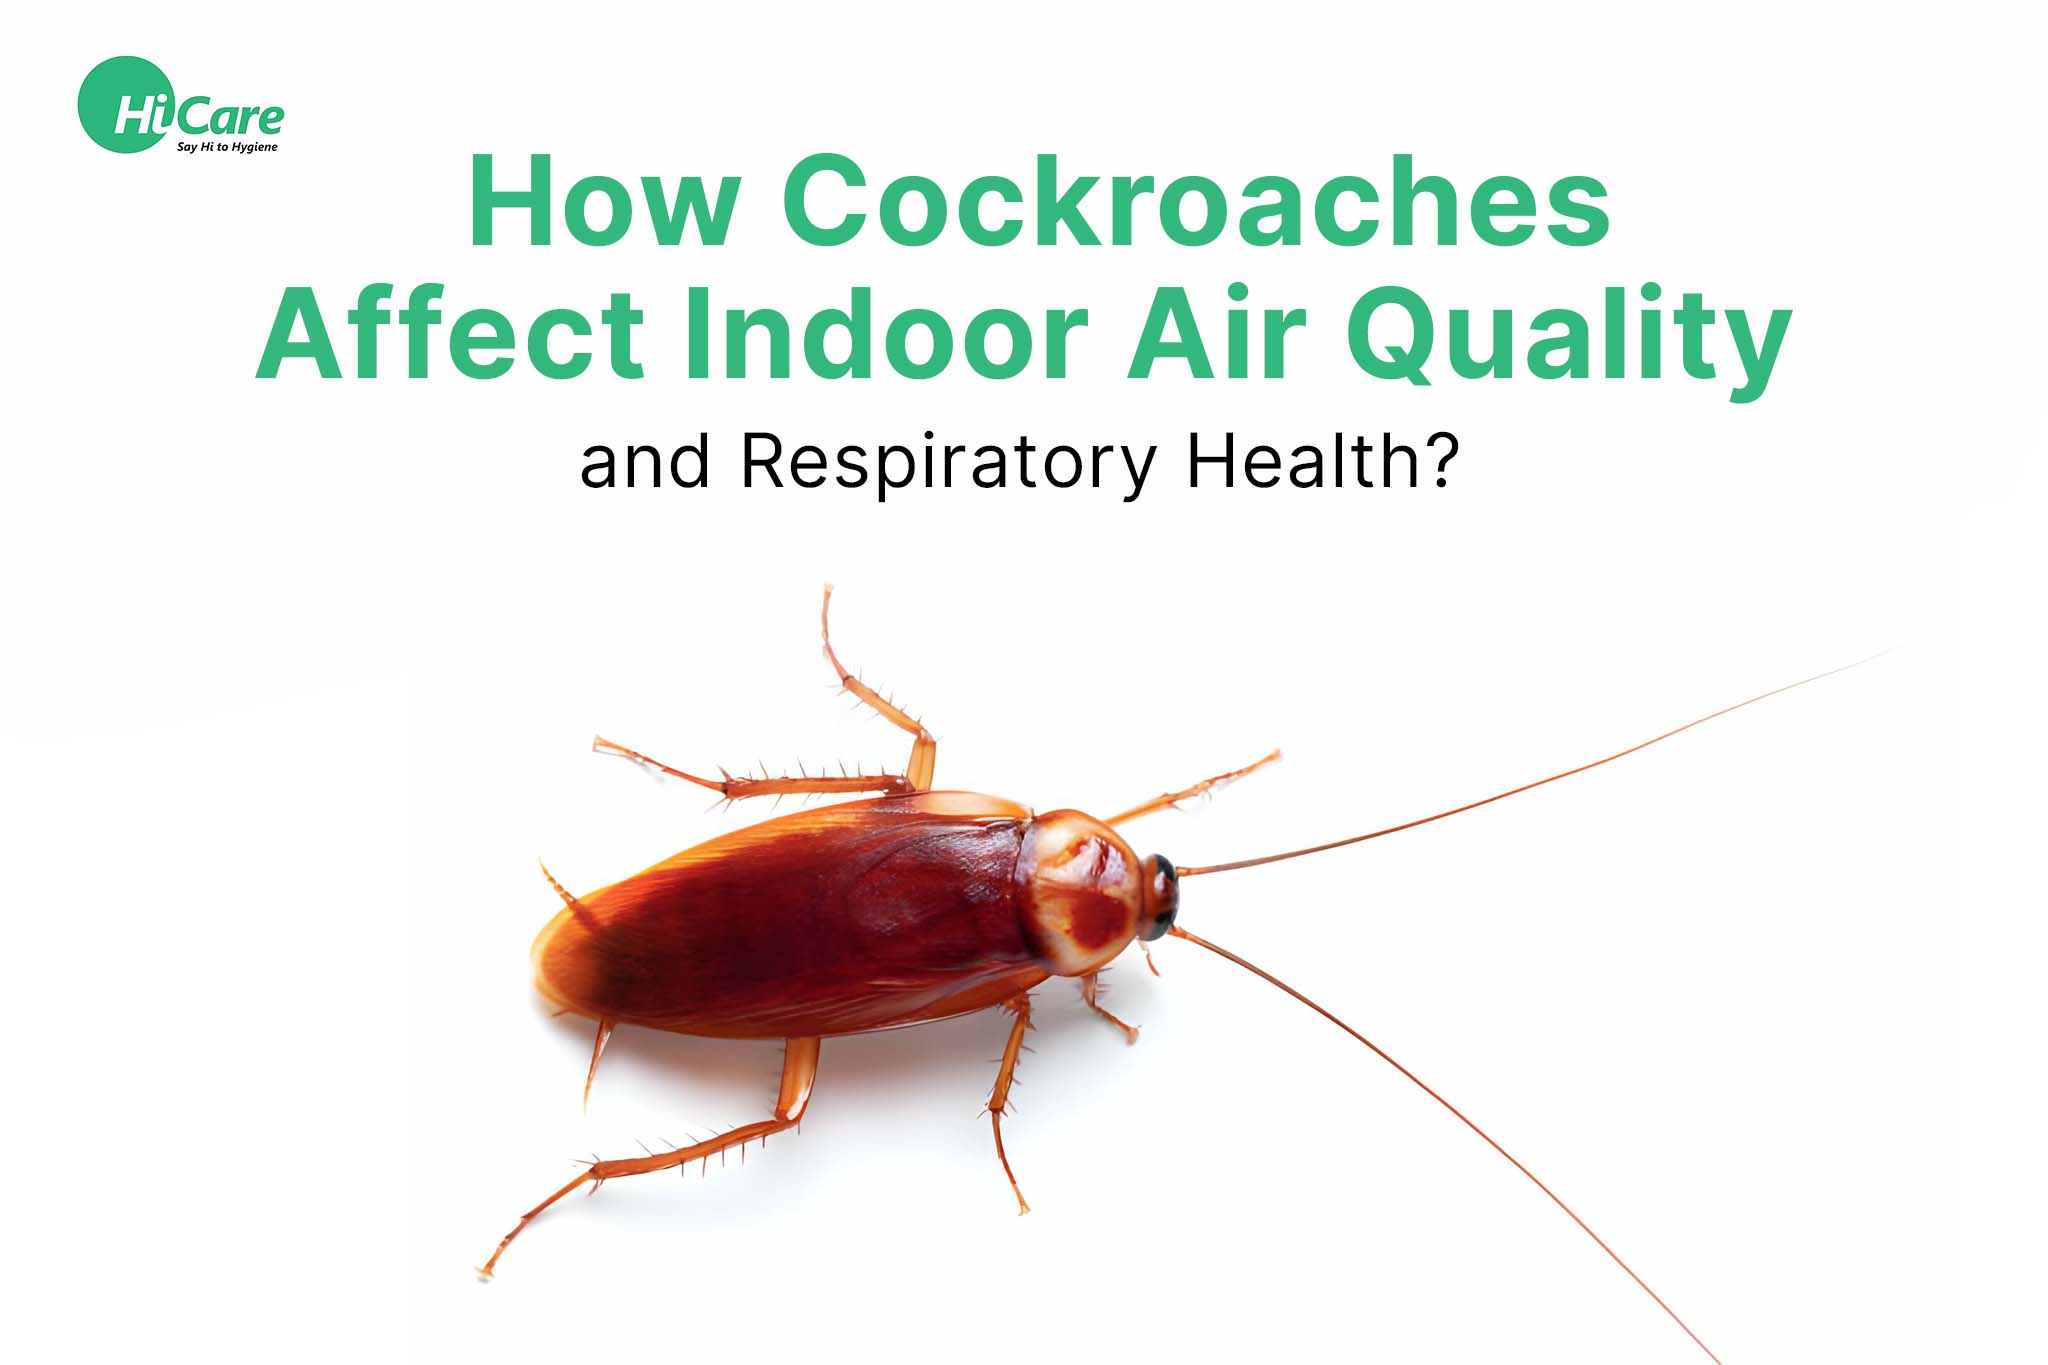 How Cockroaches Affect Indoor Air Quality and Respiratory Health?